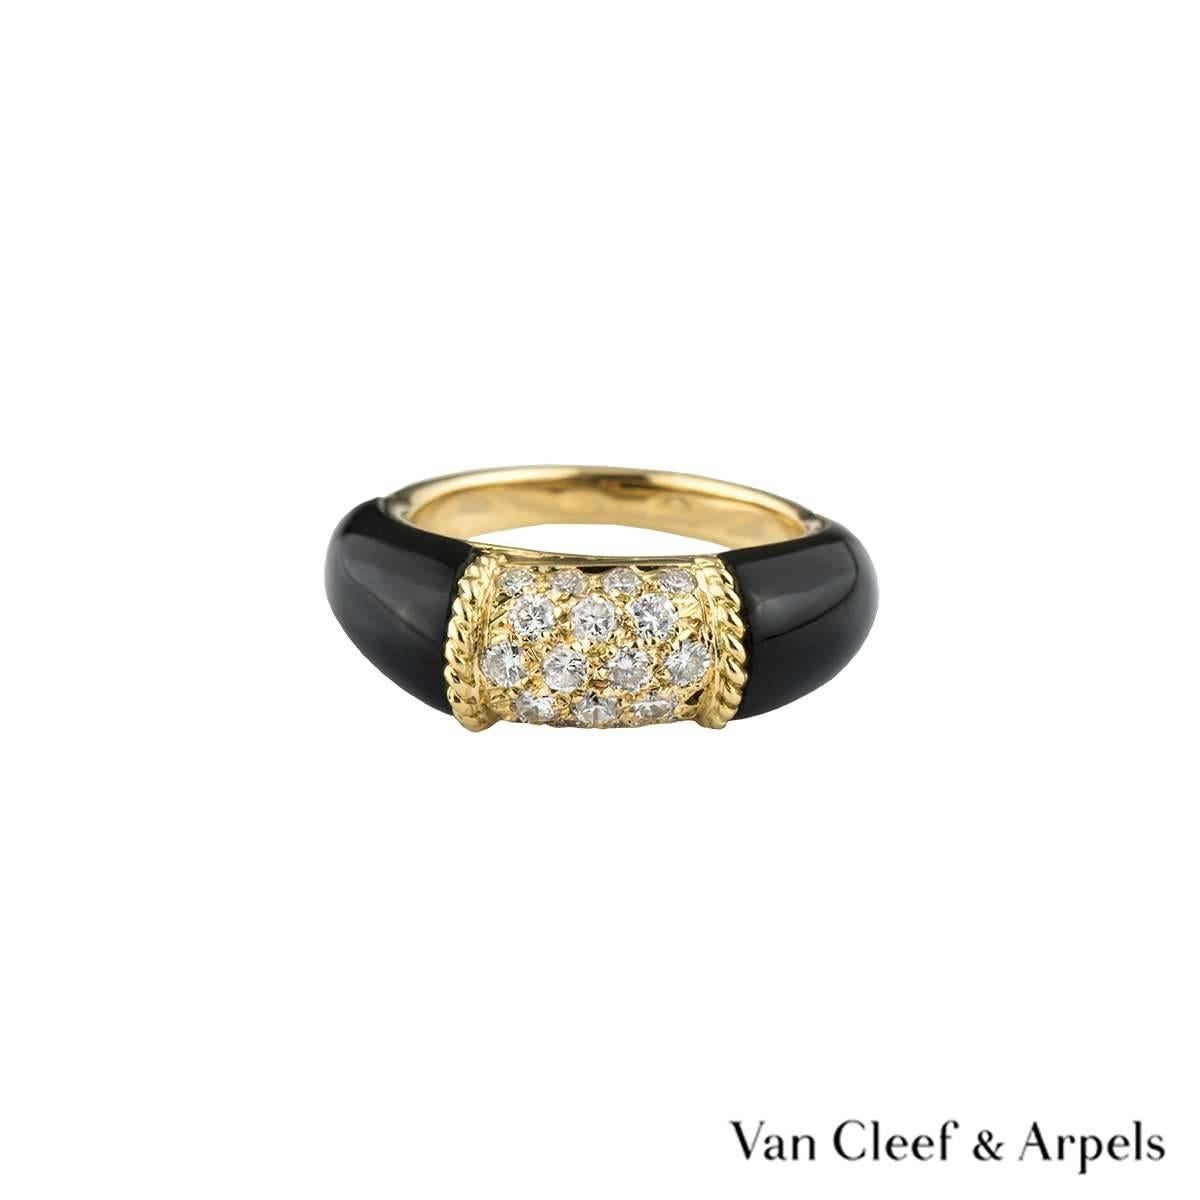 An 18k yellow gold ring from the Philippine collection by Van Cleef & Arpels. The central motif is set with 18 round brilliant cut diamonds totalling approximately 0.50ct, predominantly G colour and VS clarity. The diamond motif has a ropetwist